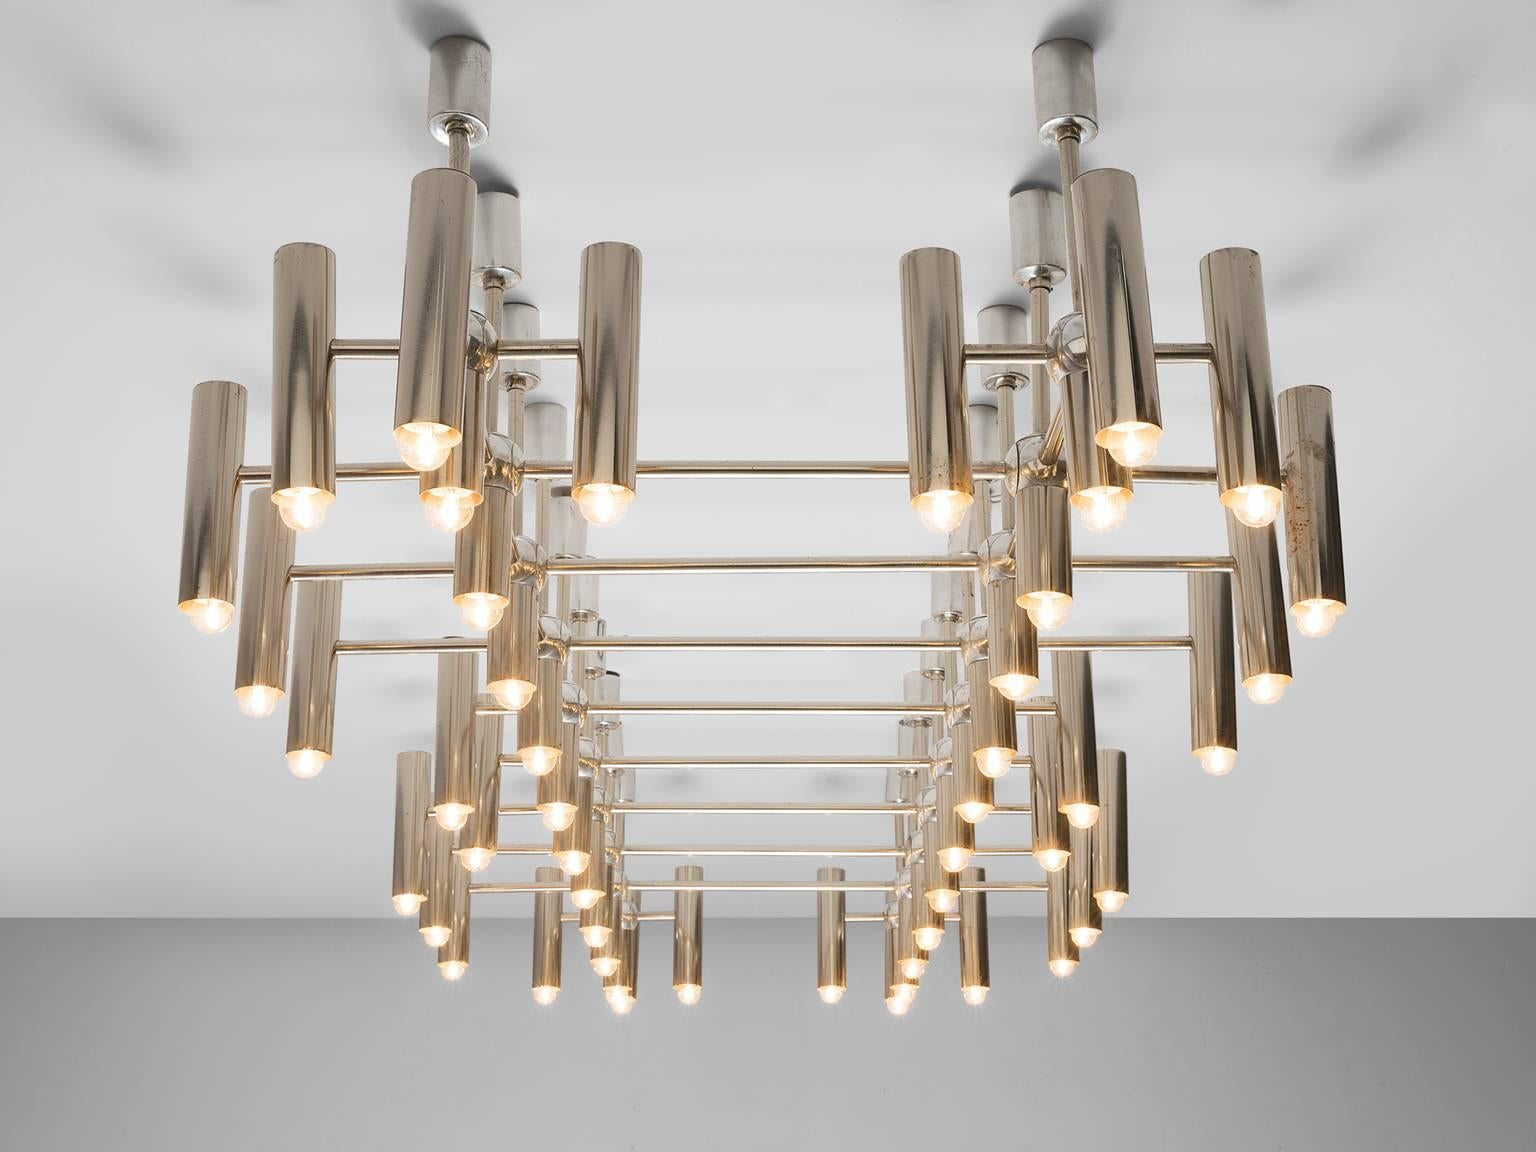 Chandelier, polished steel with 48 bulbs, Europe, 1970s.

This chandelier is executed in chromed steel and features a grid like frame. The grid consists of multiple crosses that are connected with one another. At the end of each cross a tube like